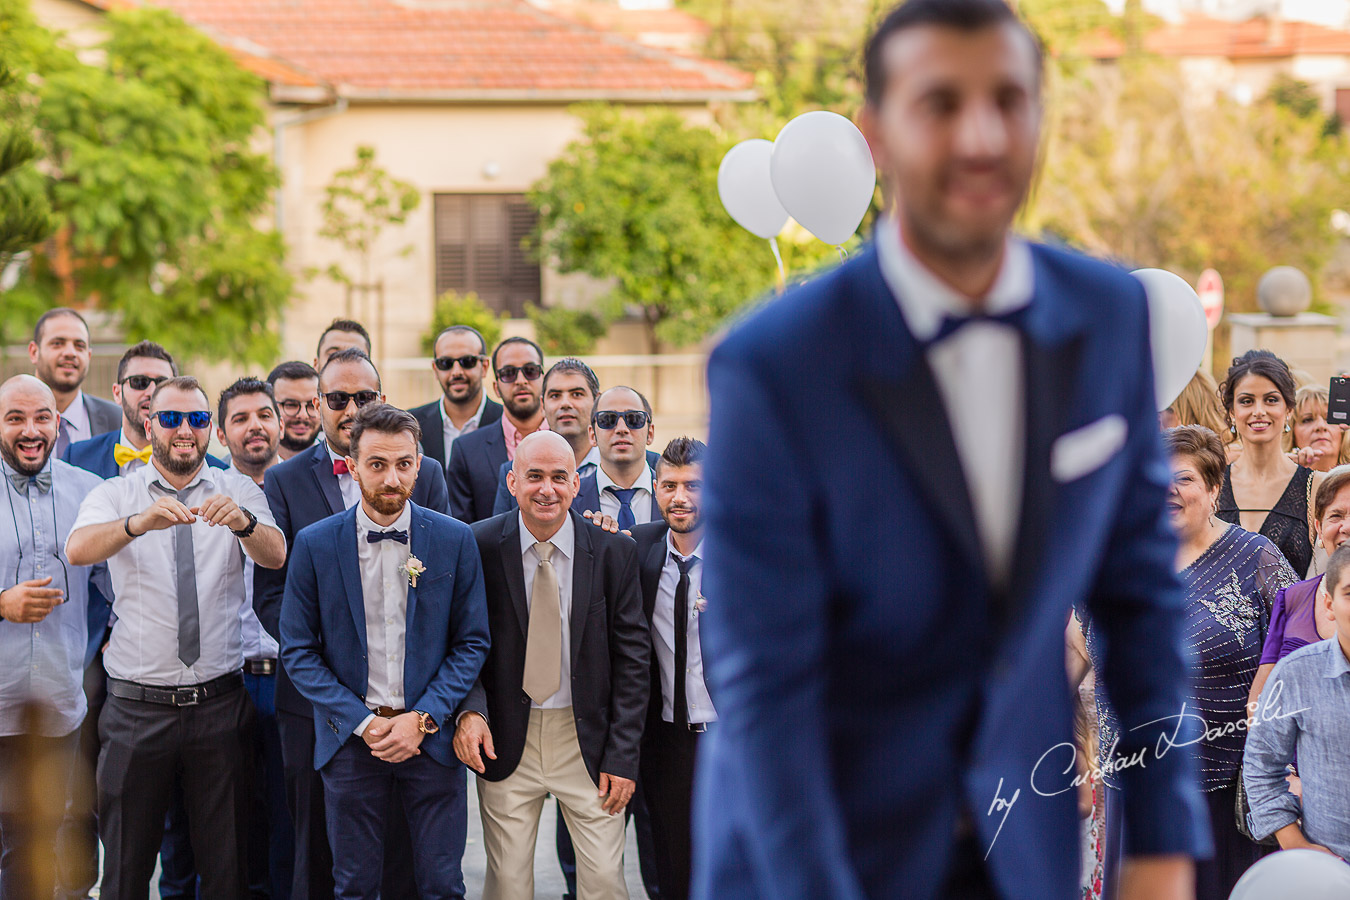 Immediate moments after the church ceremony captured at an elegant and romantic wedding at Elias Beach Hotel by Cristian Dascalu.